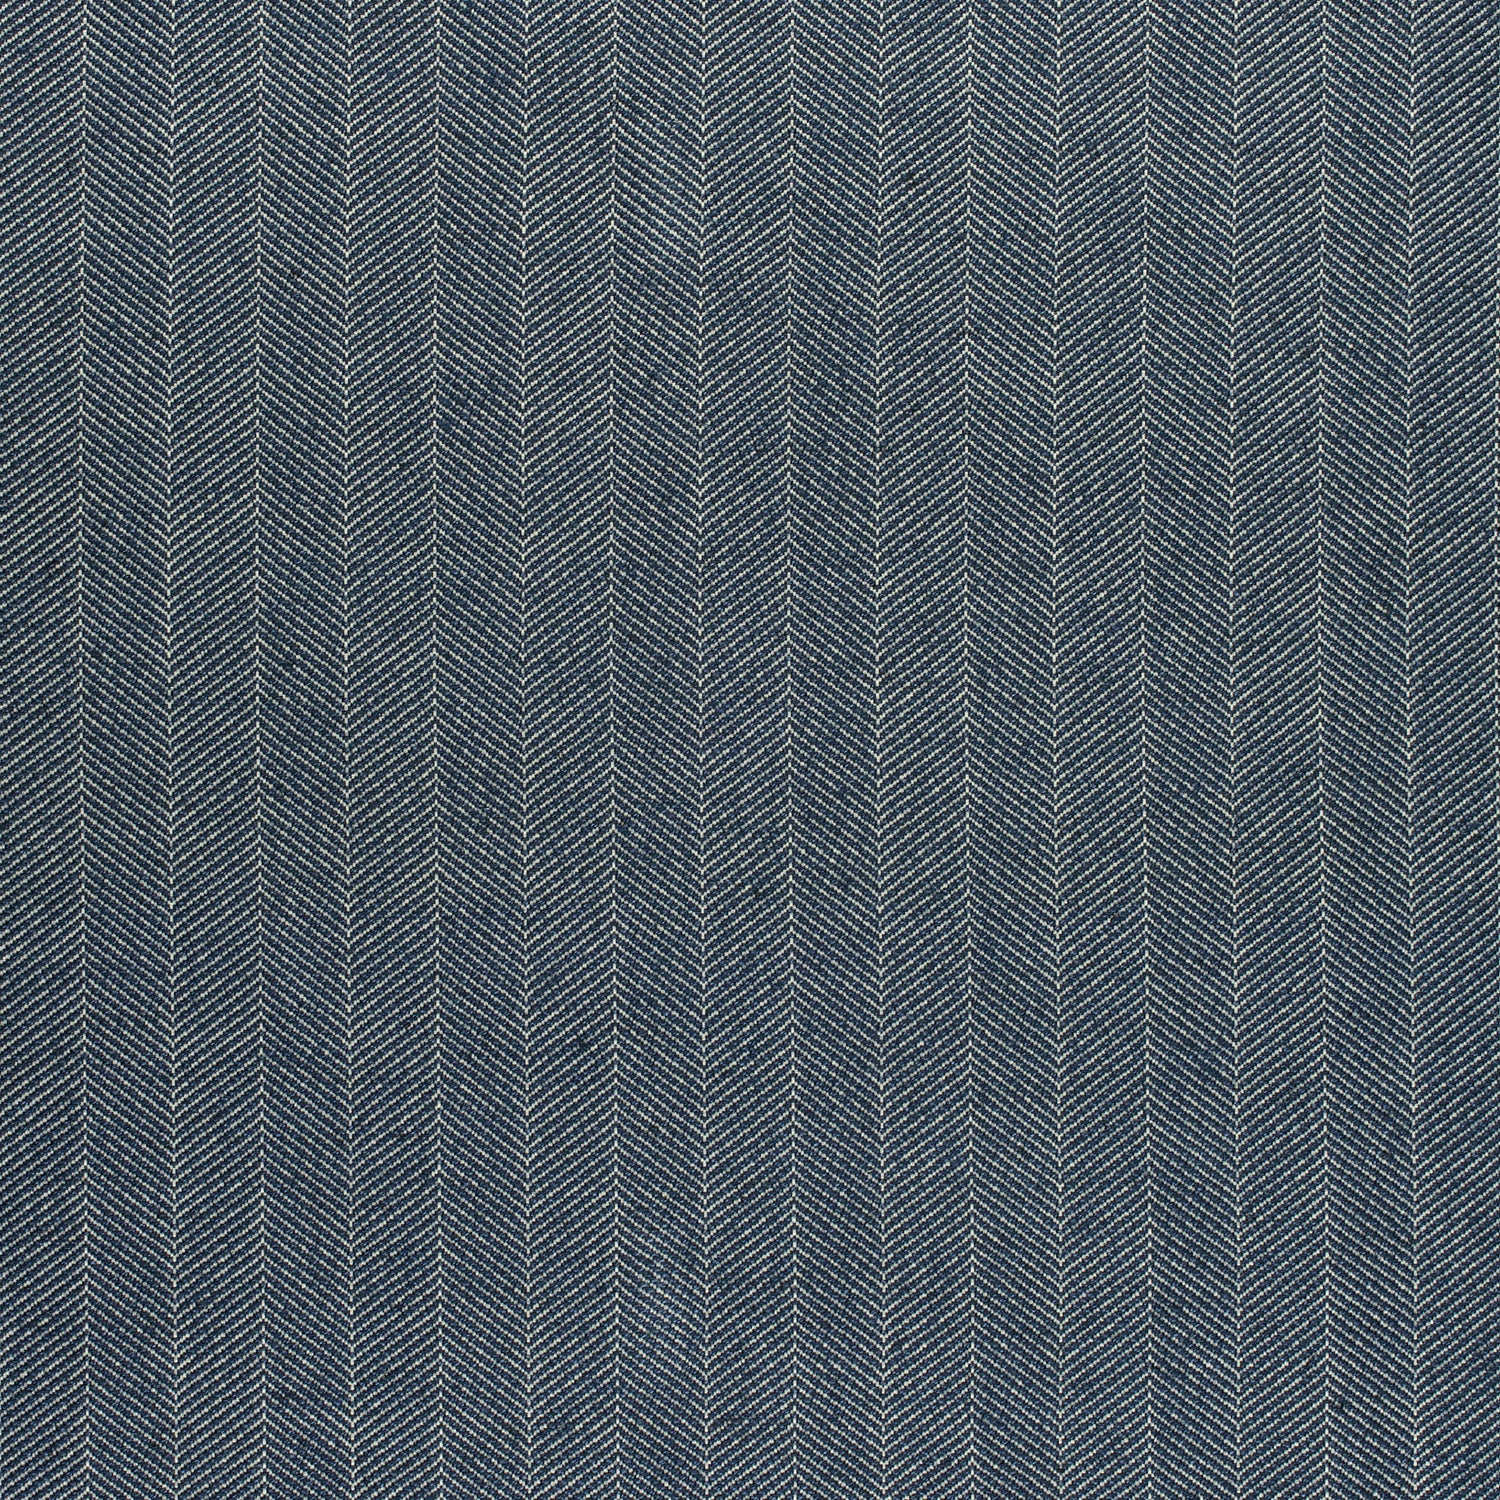 Hamilton Herringbone fabric in ink color - pattern number W80673 - by Thibaut in the Pinnacle collection